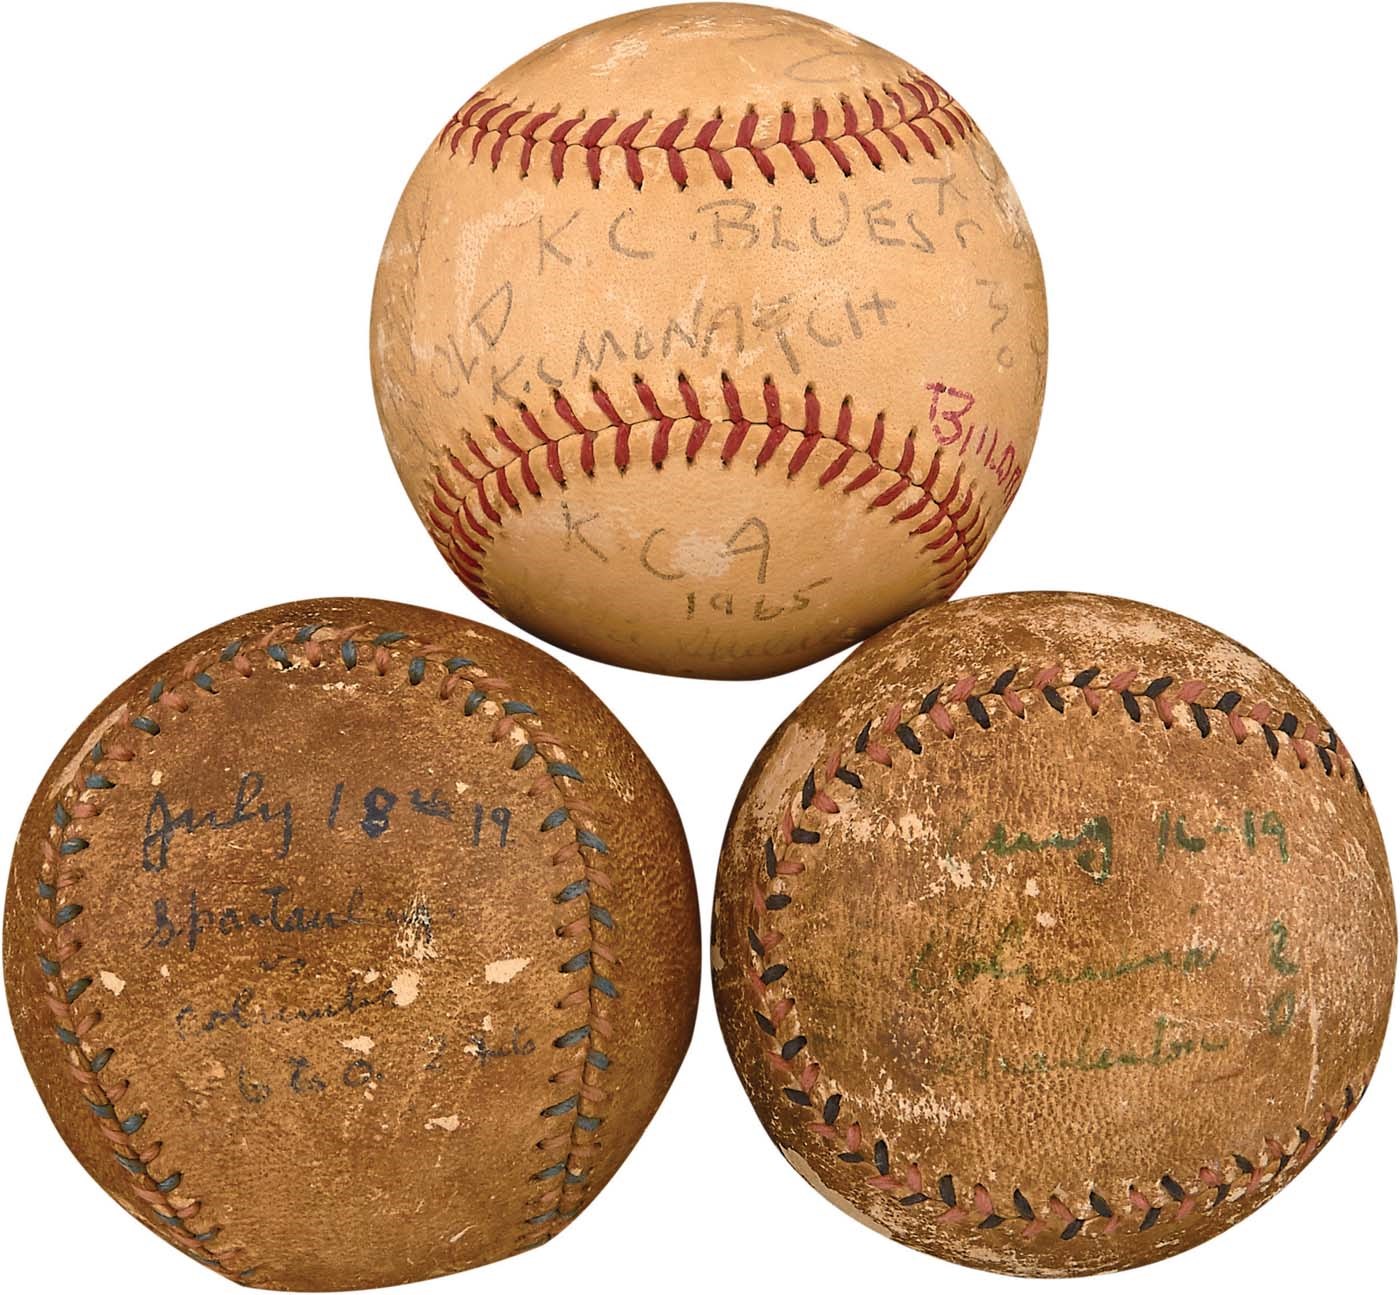 Historic 1965 Game Used Baseball from Satchel Paige's Last Game